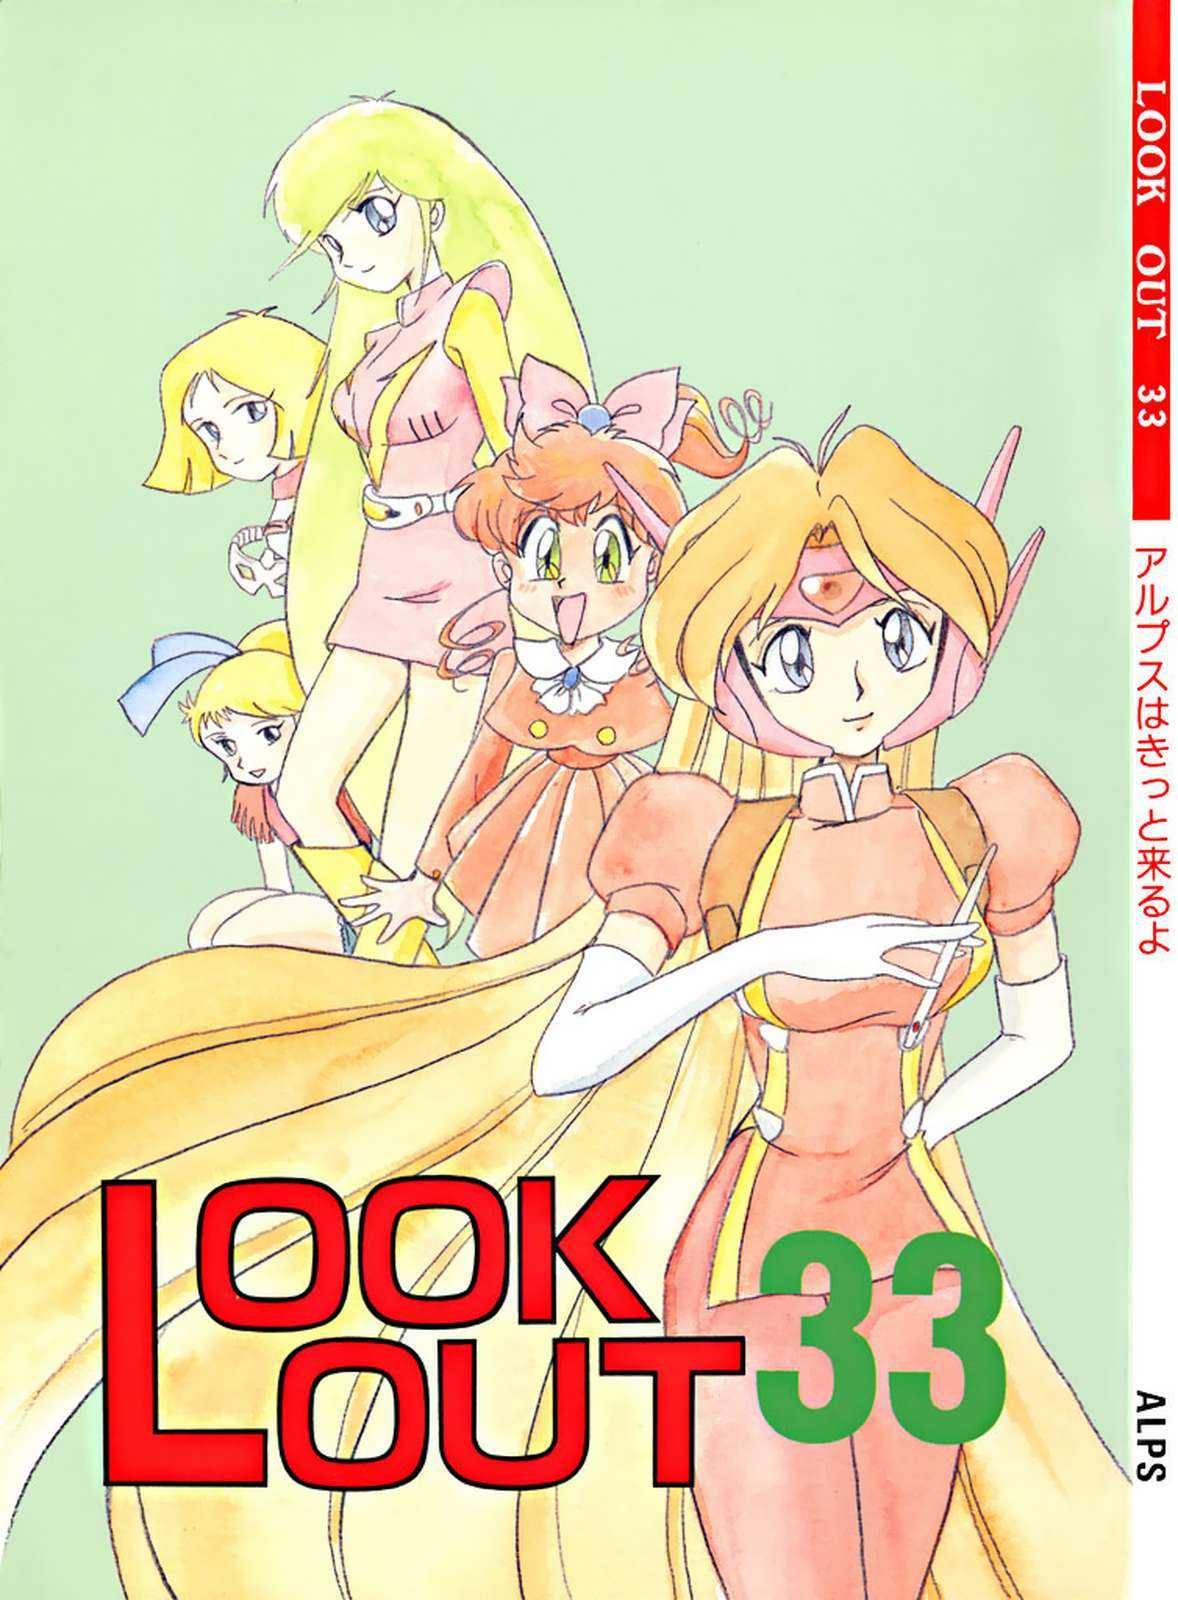 (Various) look_out_33 